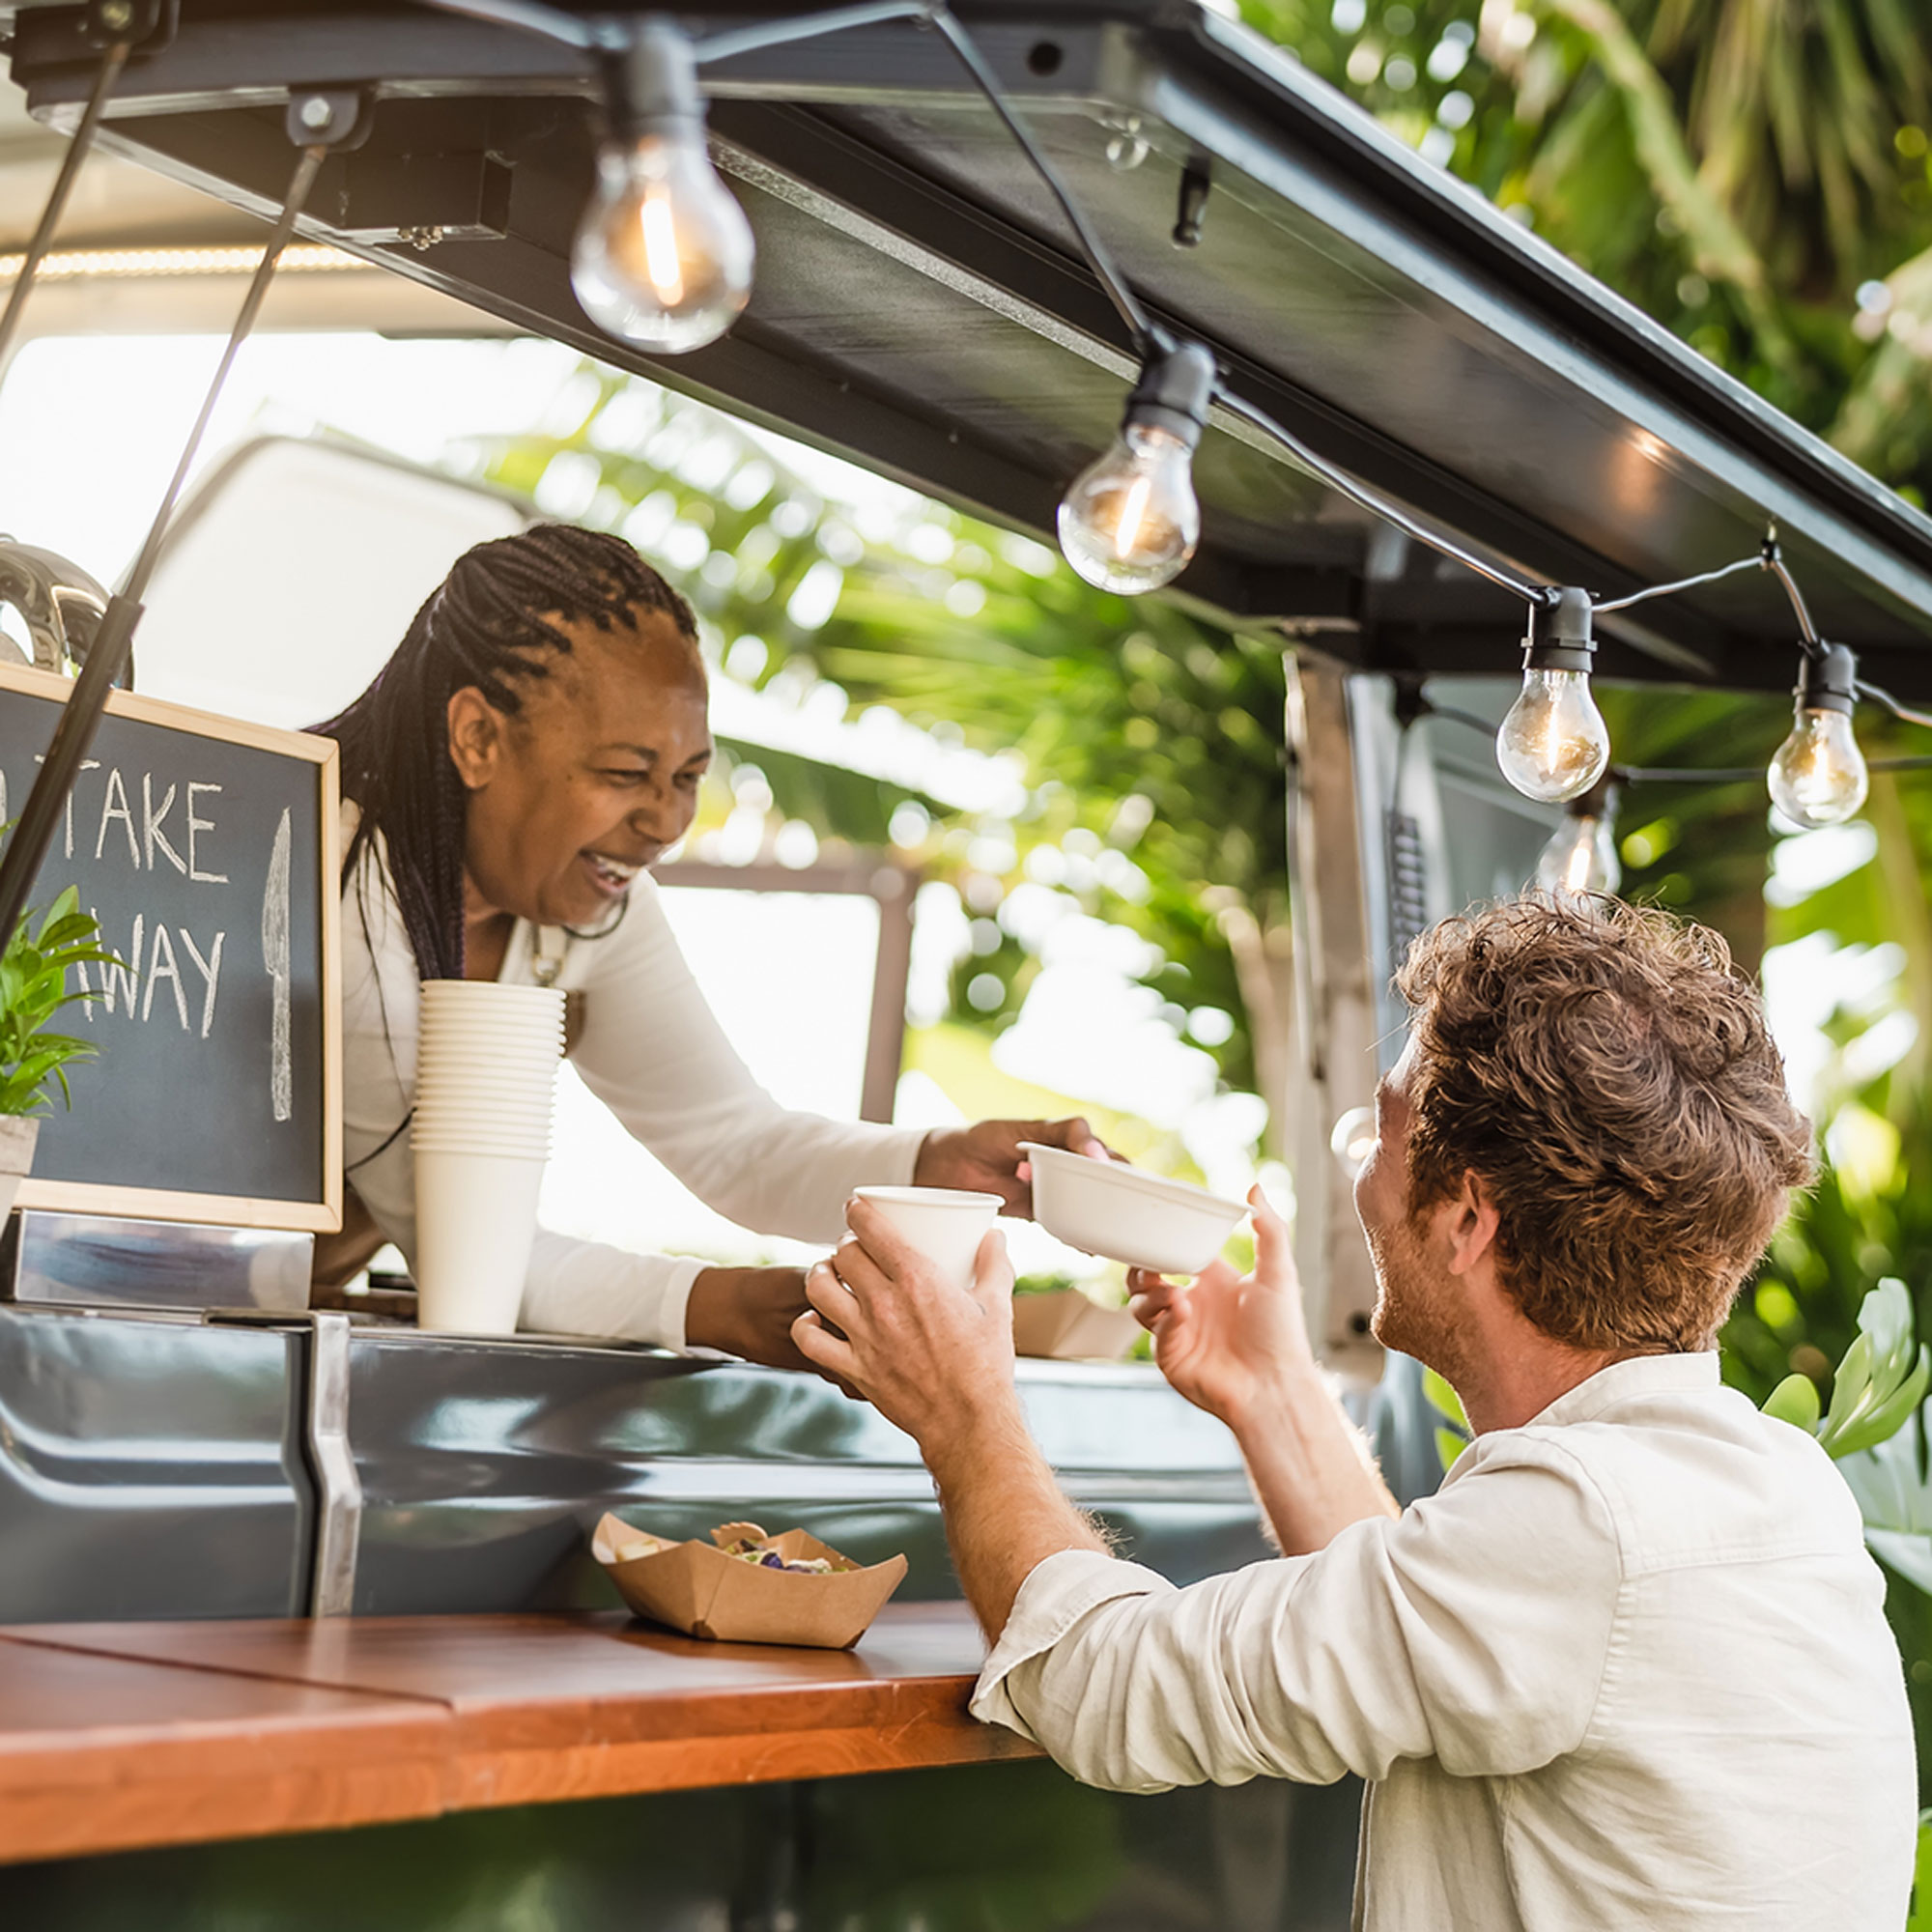 A woman hands a man a plate and drink from a food truck